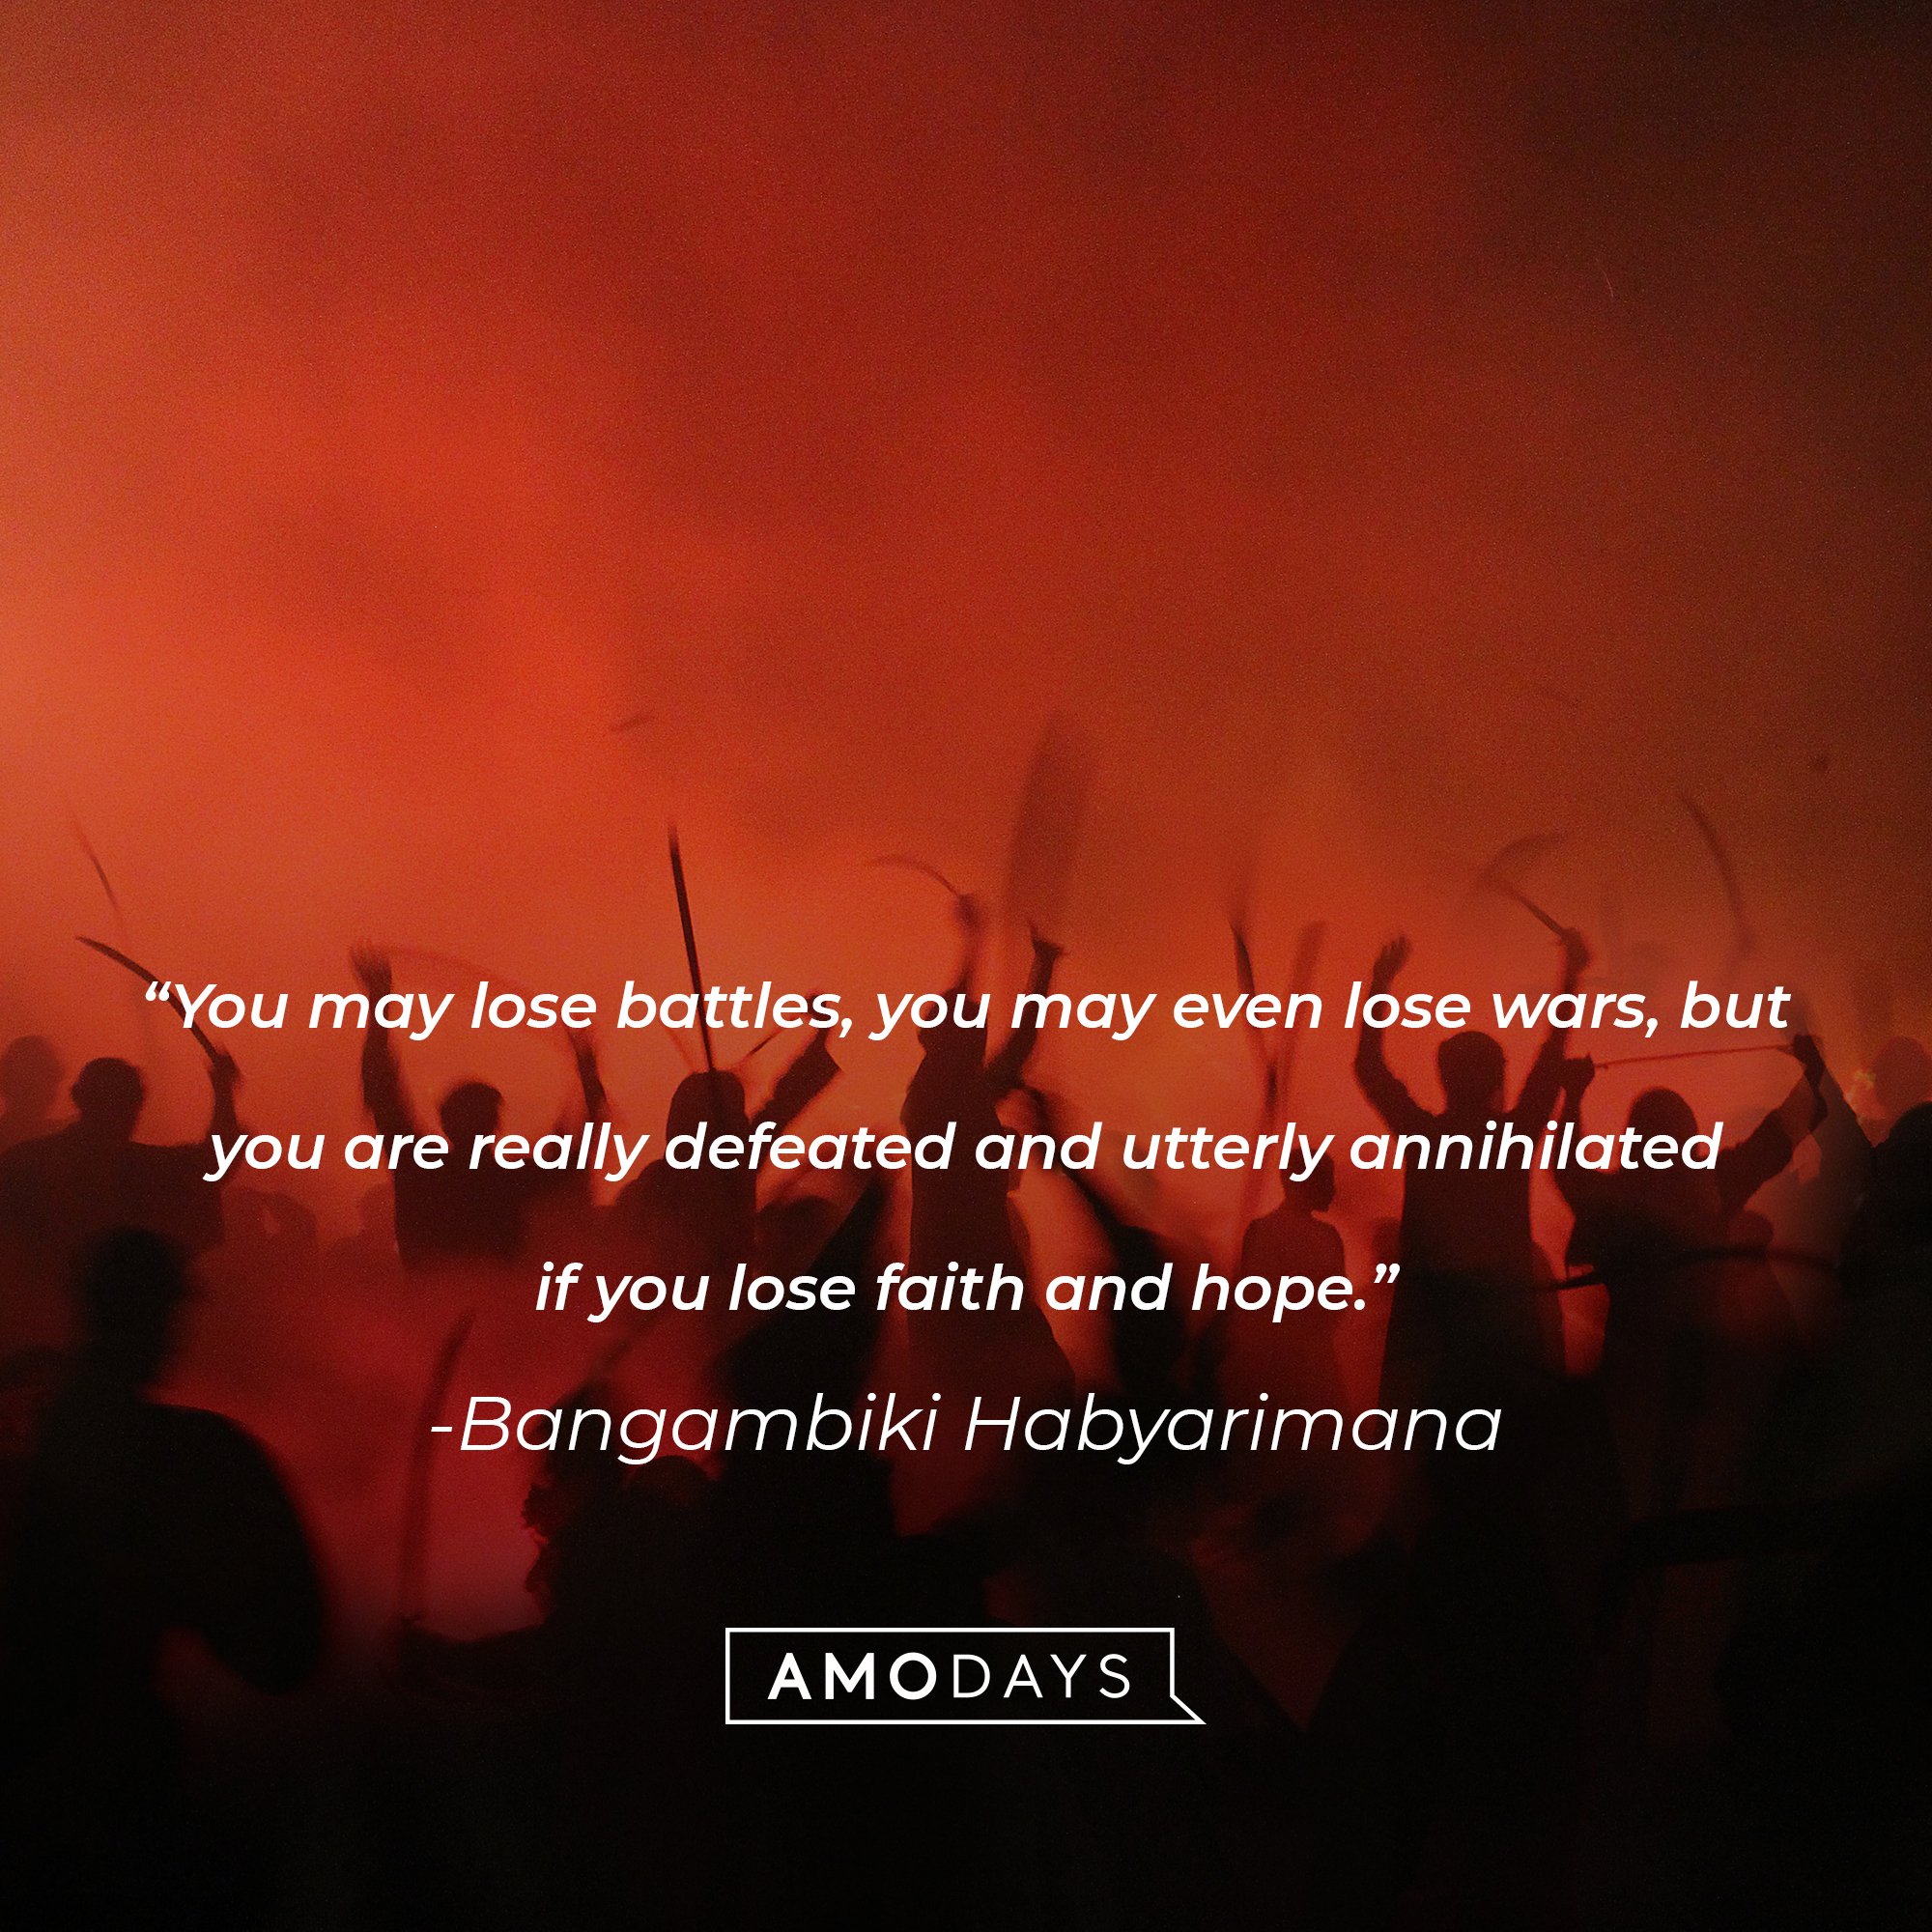 Bangambiki Habyarimana's quote: "You may lose battles, you may even lose wars, but you are really defeated and utterly annihilated if you lose faith and hope." | Image: AmoDays